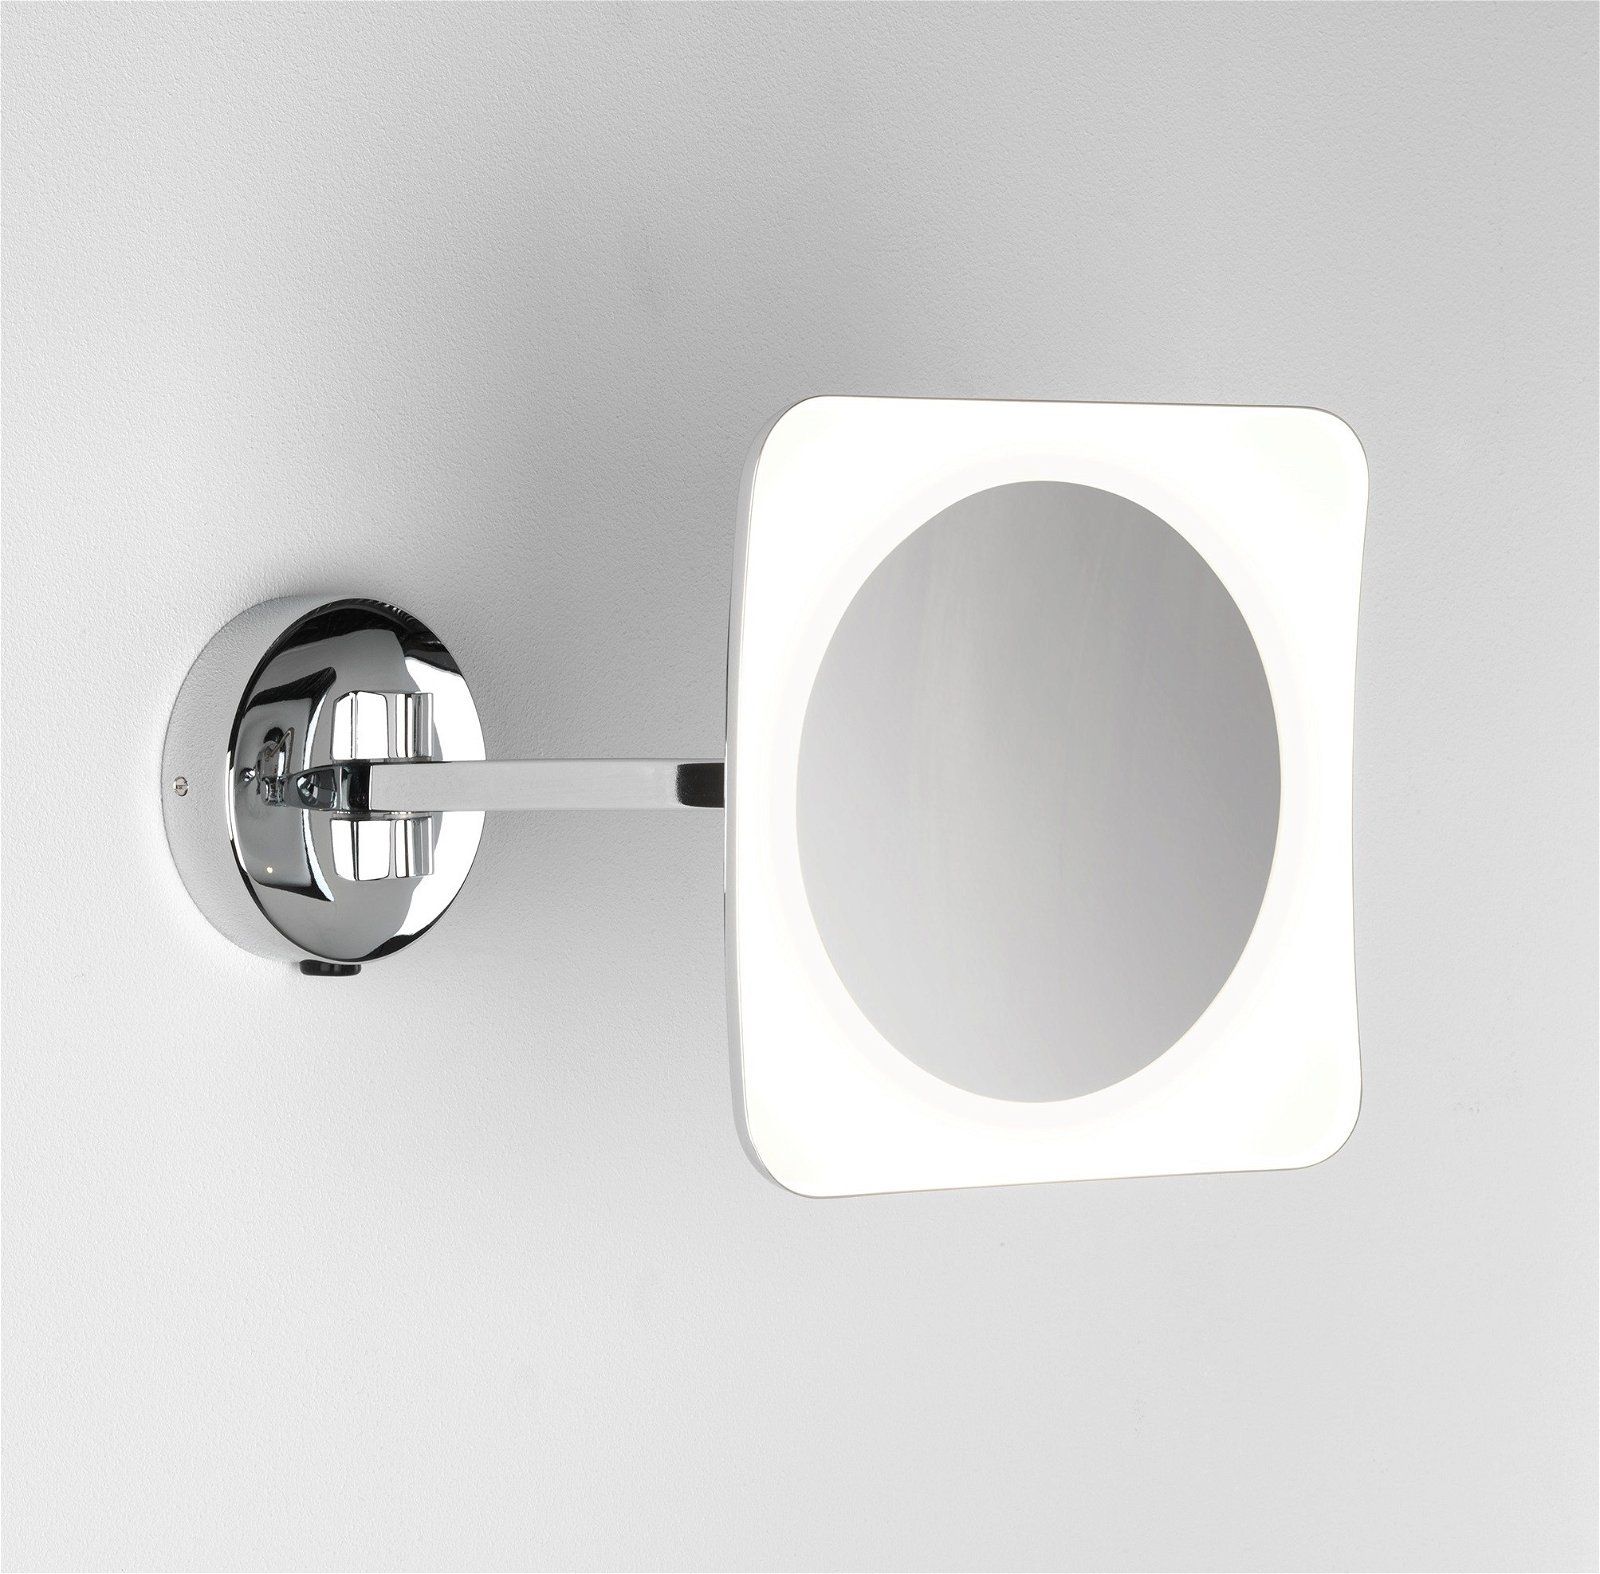 Astro Lighting – Mascali Square Led 1373003 (7968) – Ip44 Polished Throughout Polished Chrome Tilt Wall Mirrors (View 10 of 15)